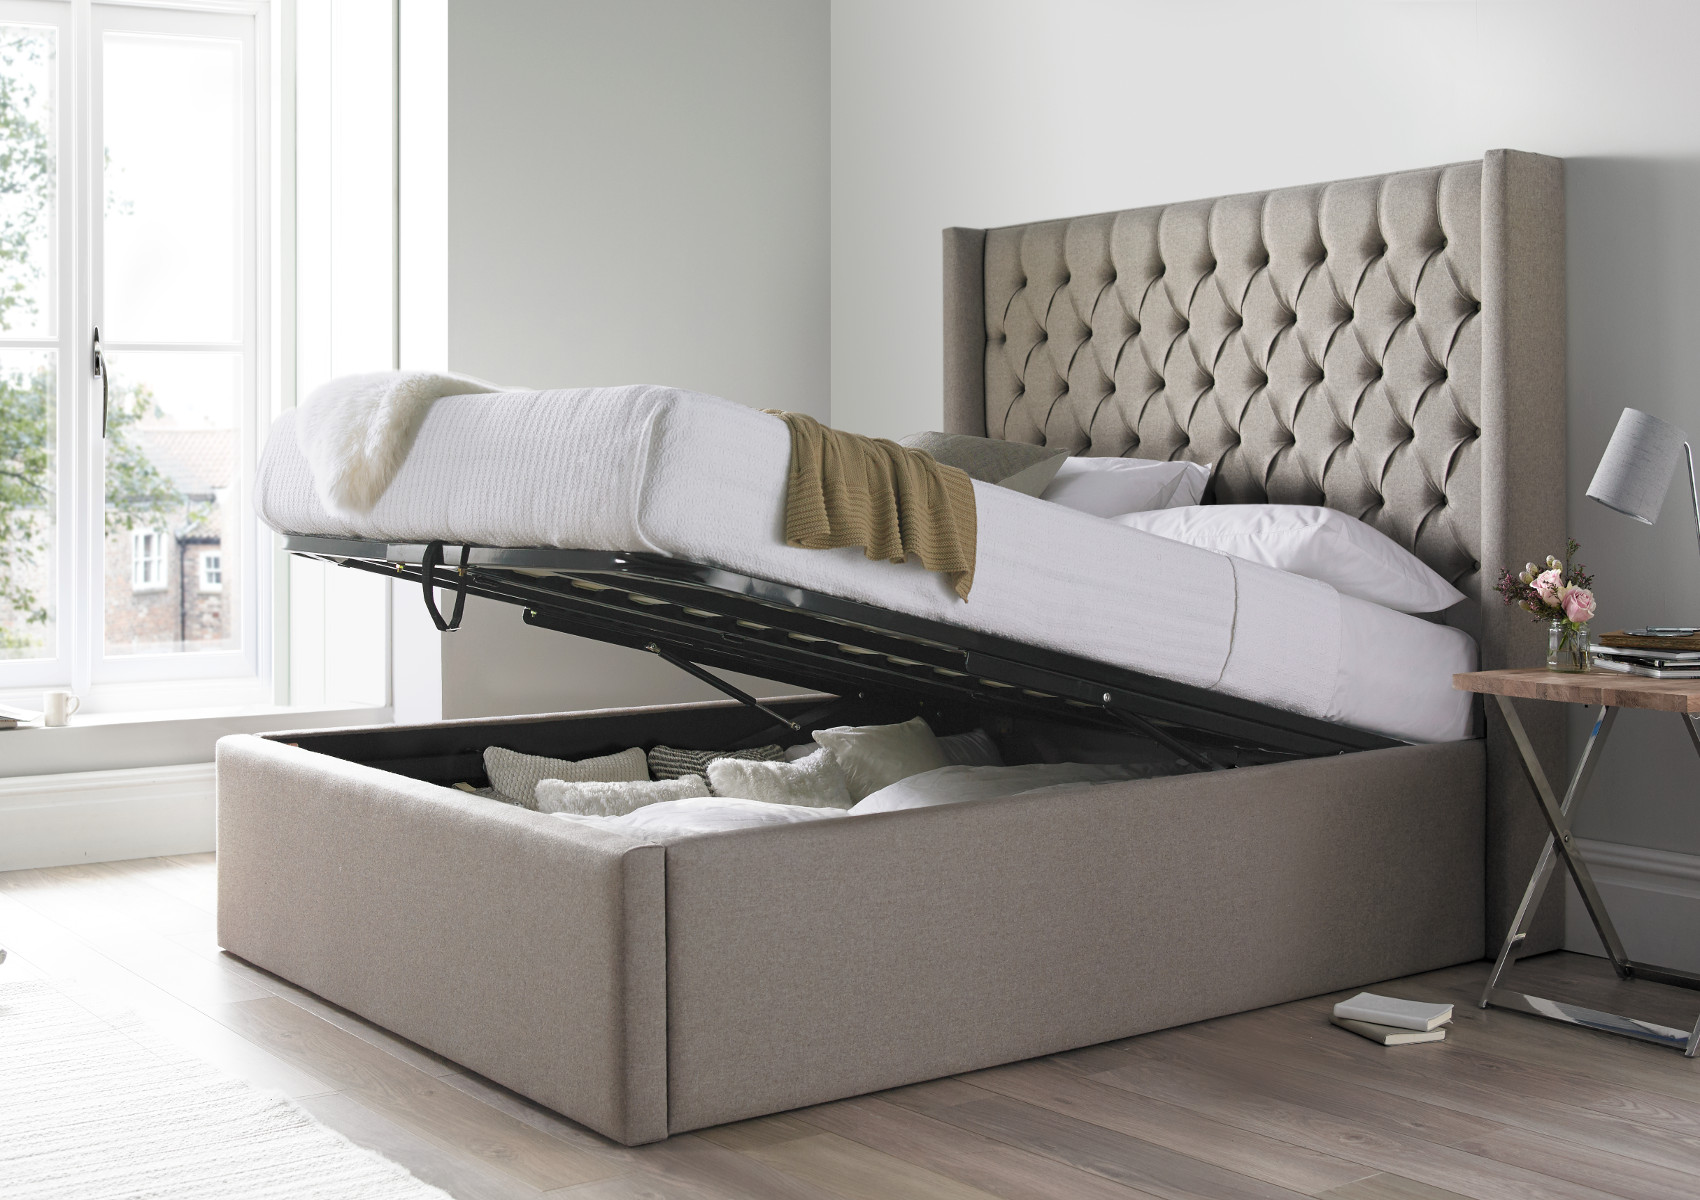 View Islington Silver Glitz Upholstered Compact Double Ottoman Bed Time4Sleep information